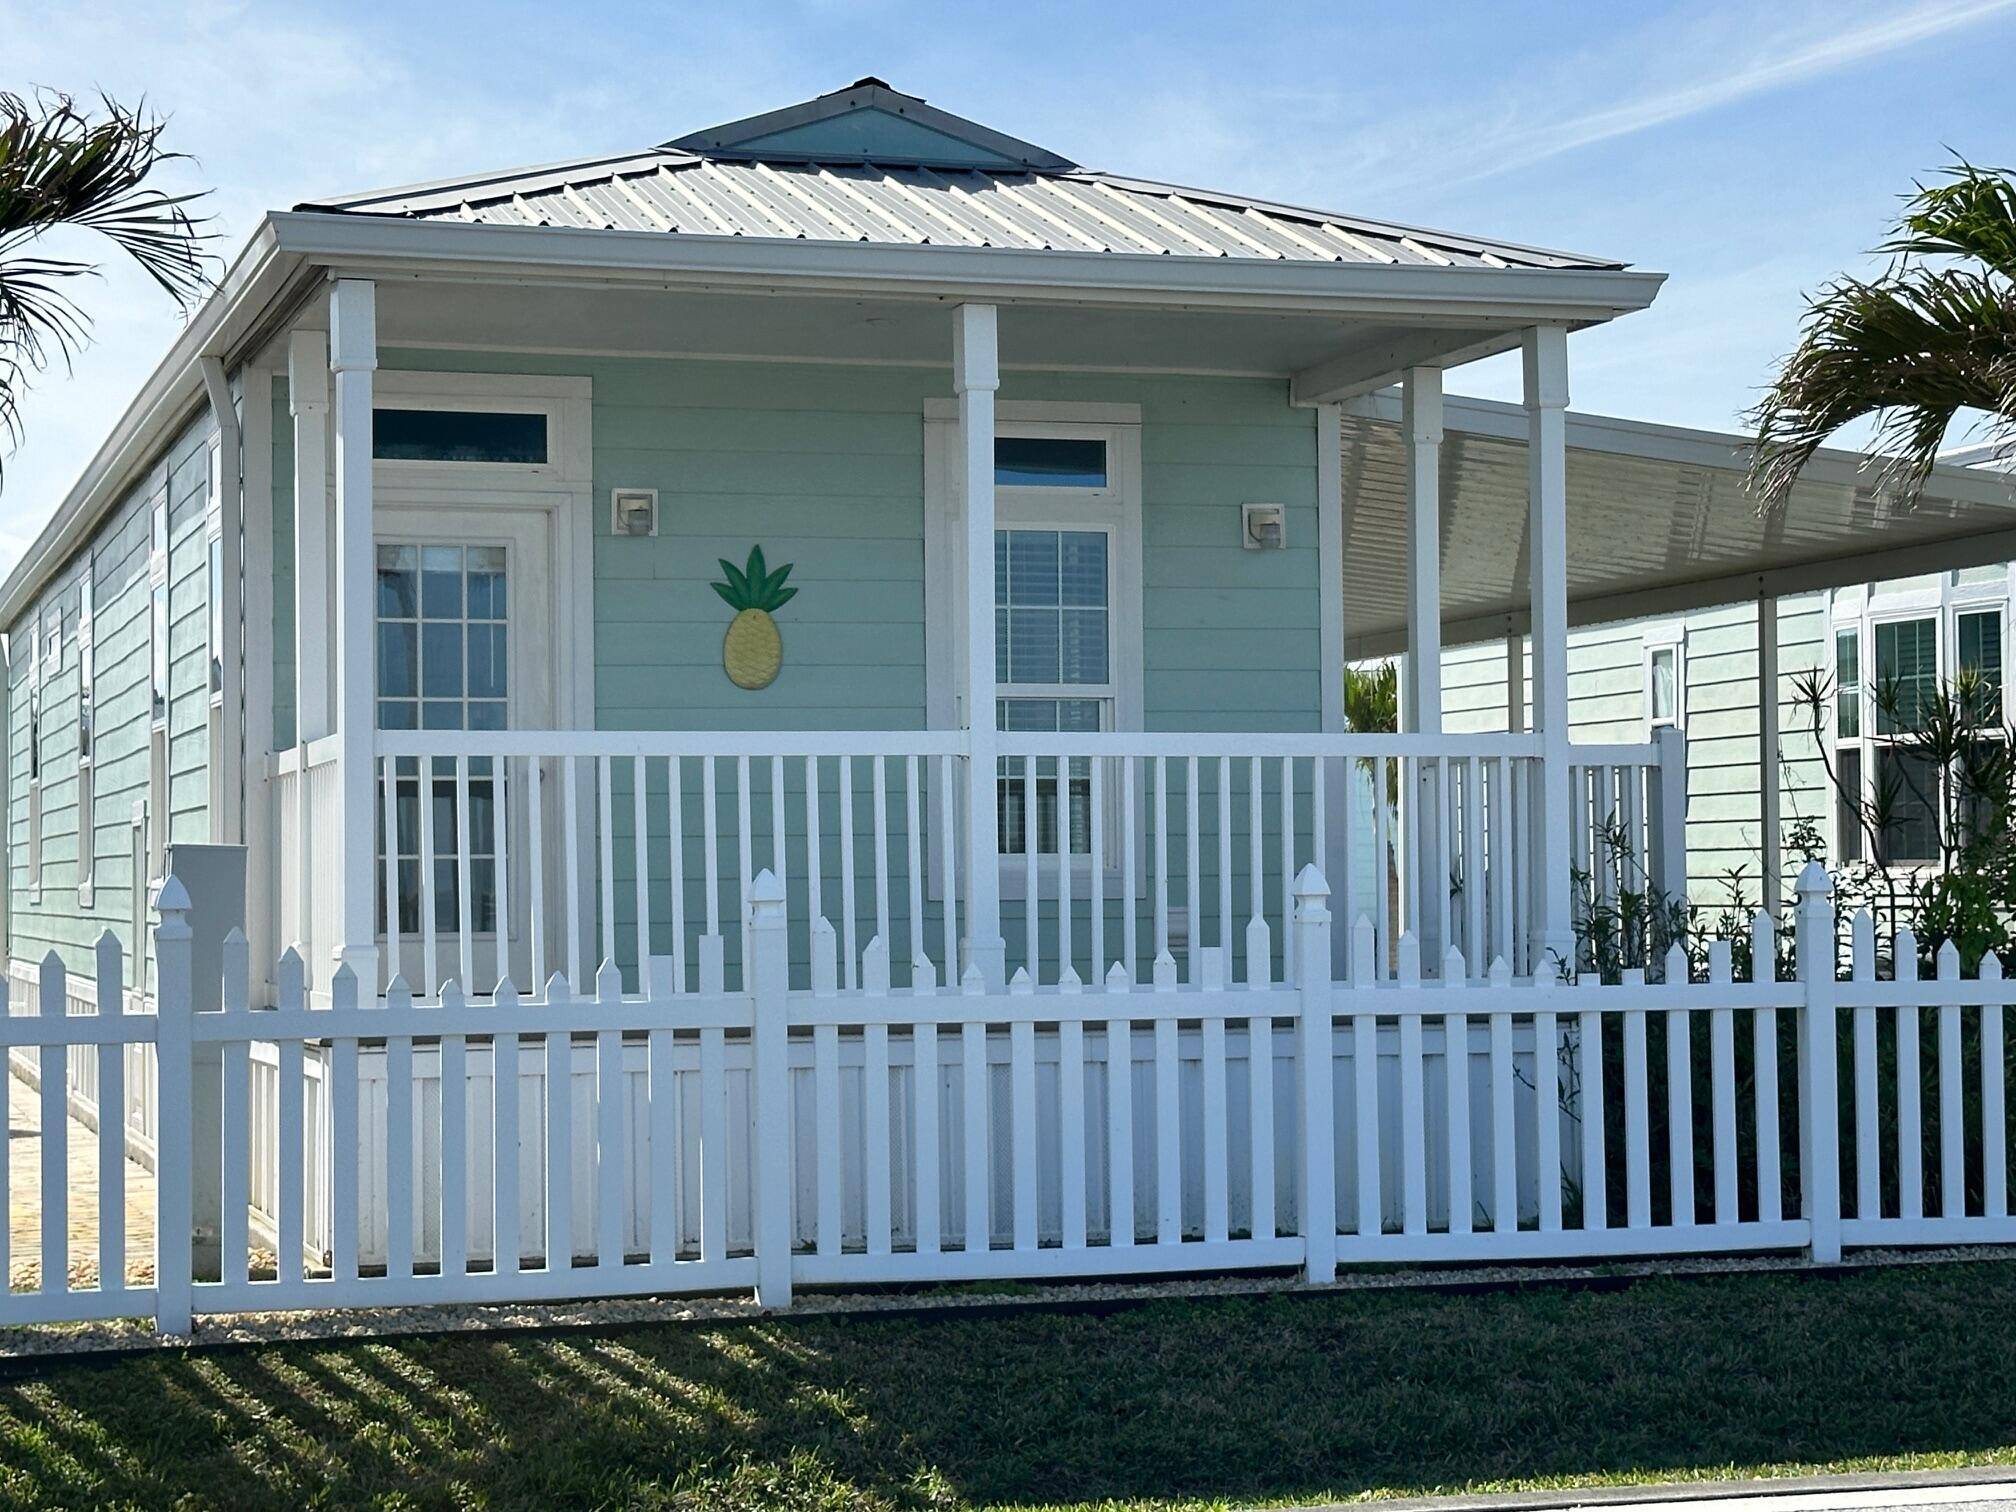 Let the vacation begin ! Located in the 55 Ocean Breeze Resort overlooking beautiful wide water views of the Indian River right off your front porch !